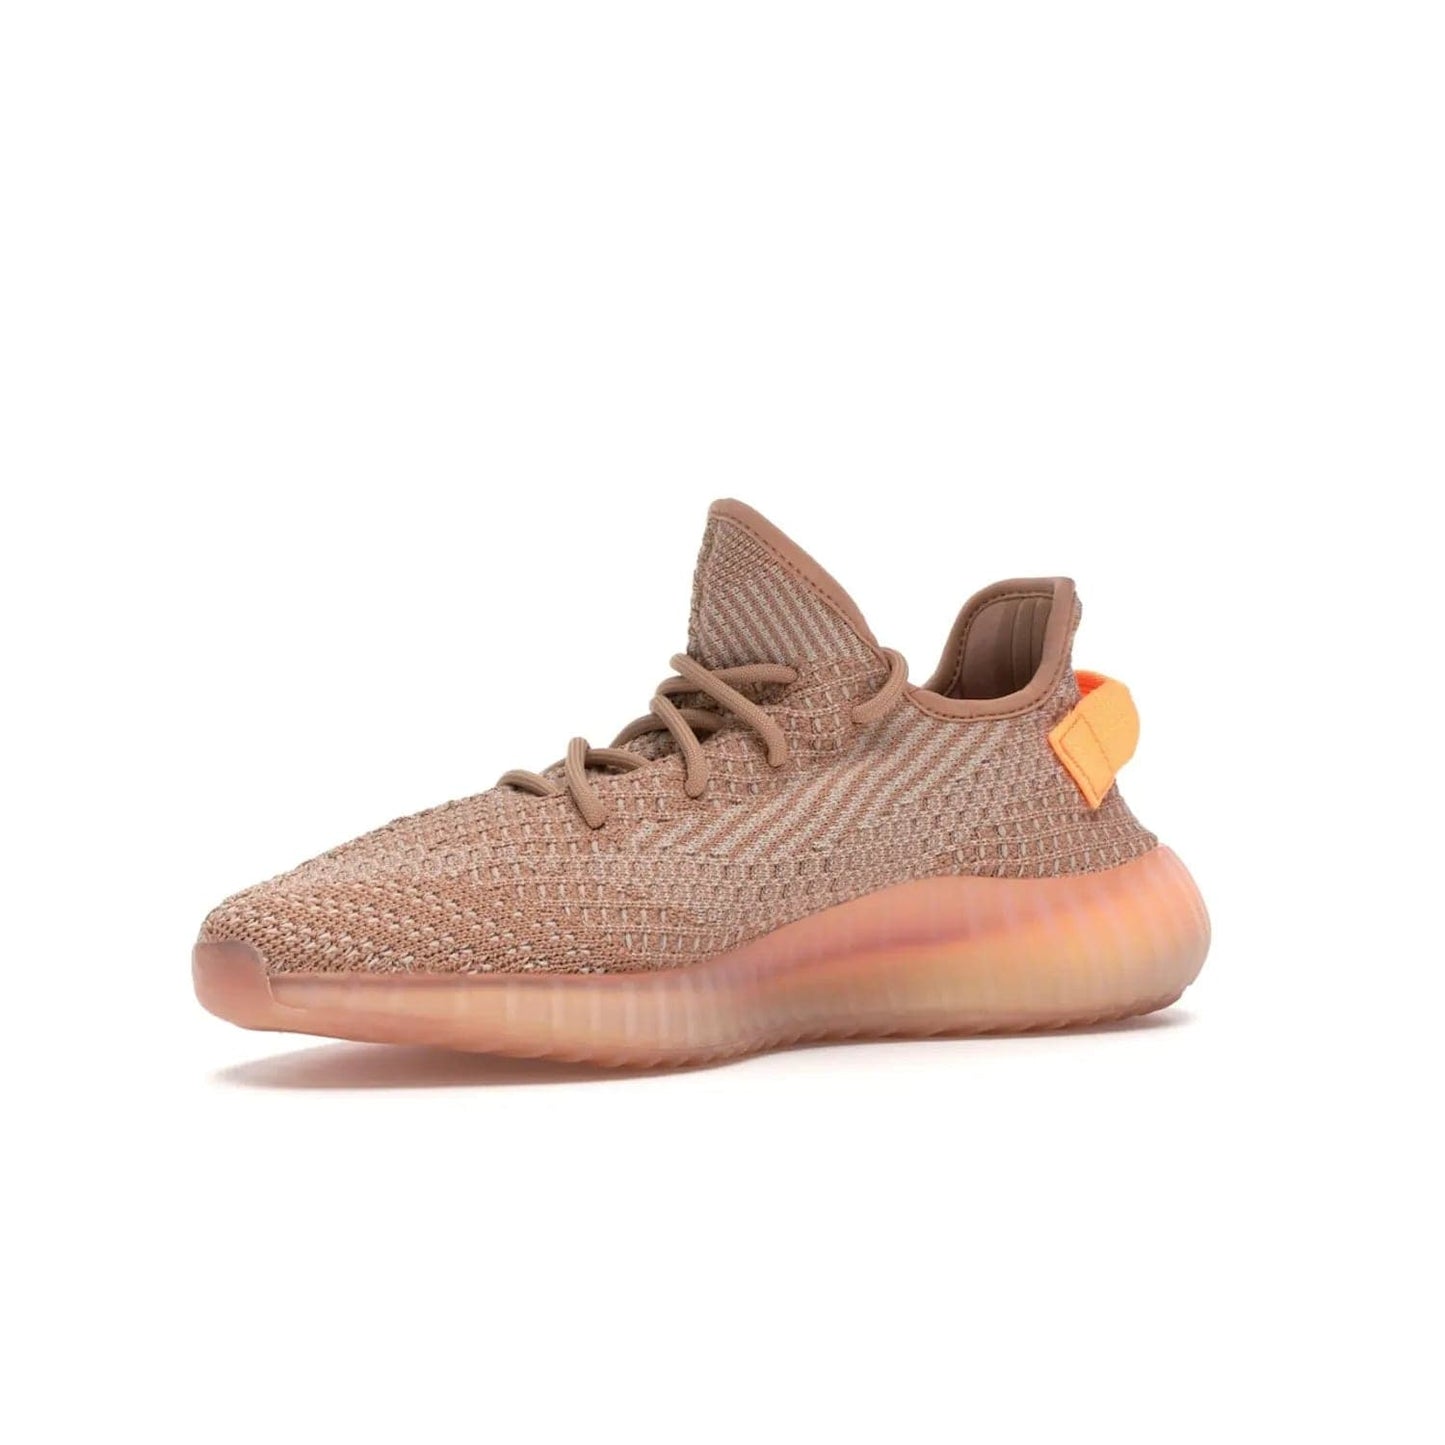 adidas Yeezy Boost 350 V2 Clay - Image 16 - Only at www.BallersClubKickz.com - The adidas Yeezy Boost 350 V2 Clay - style and swag in one shoe. Orange accents, clay midsole and sole. Get yours today!